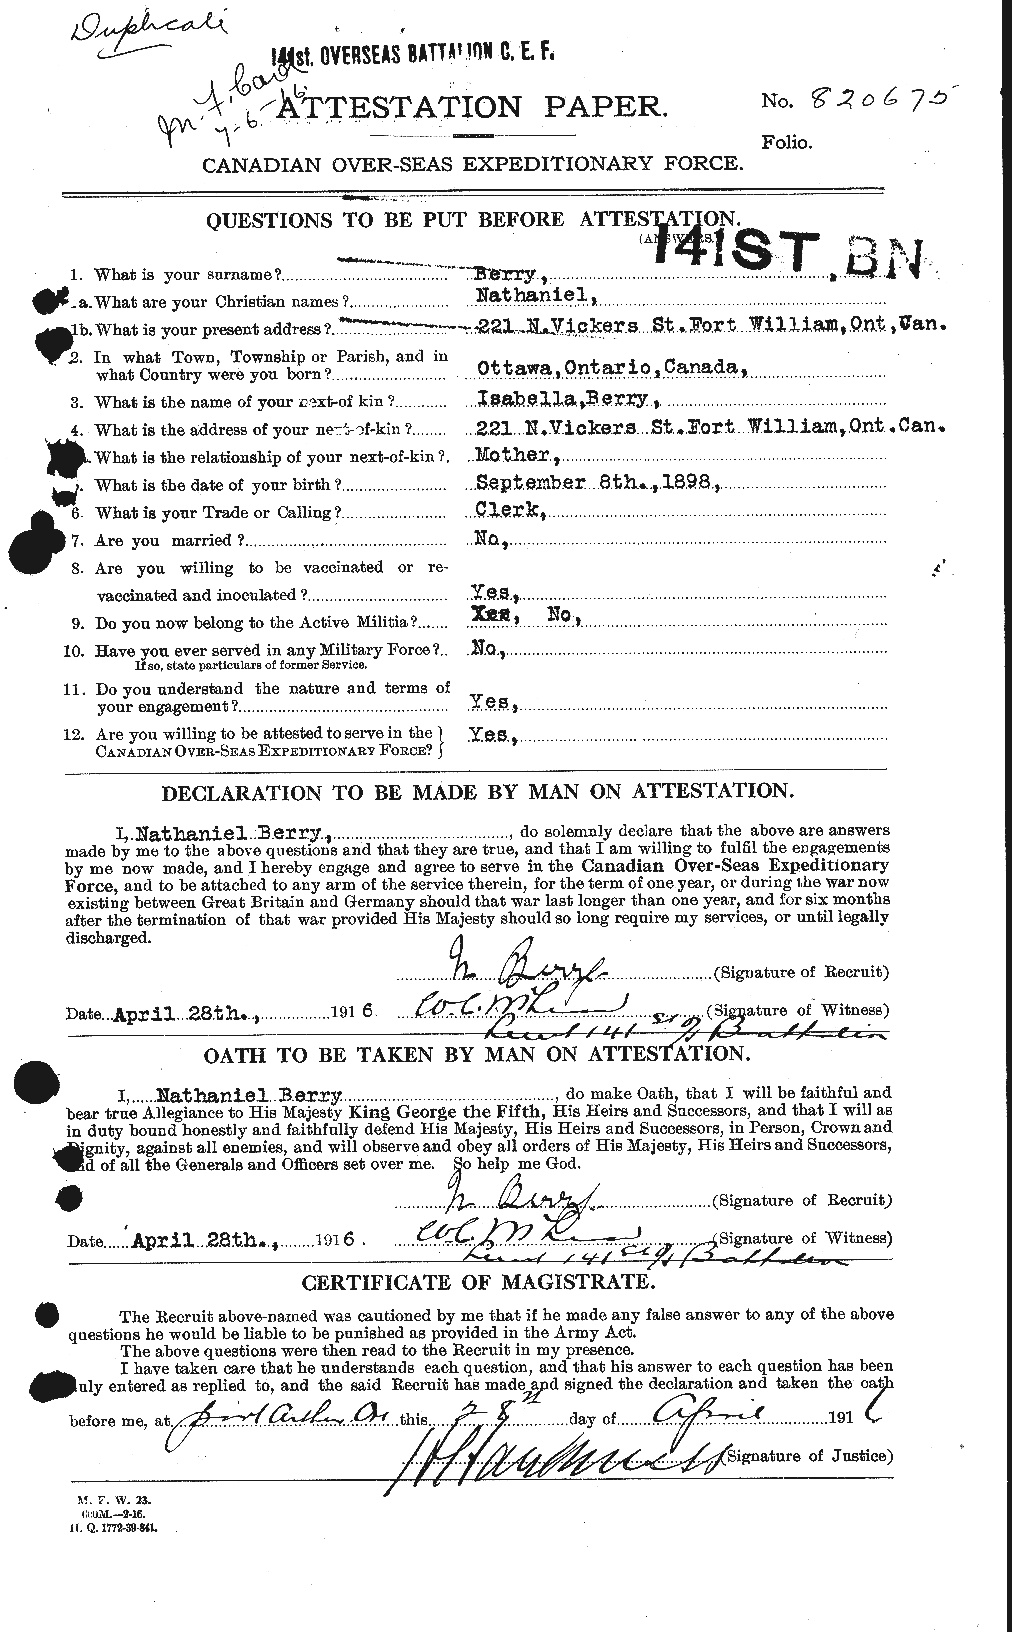 Personnel Records of the First World War - CEF 241007a